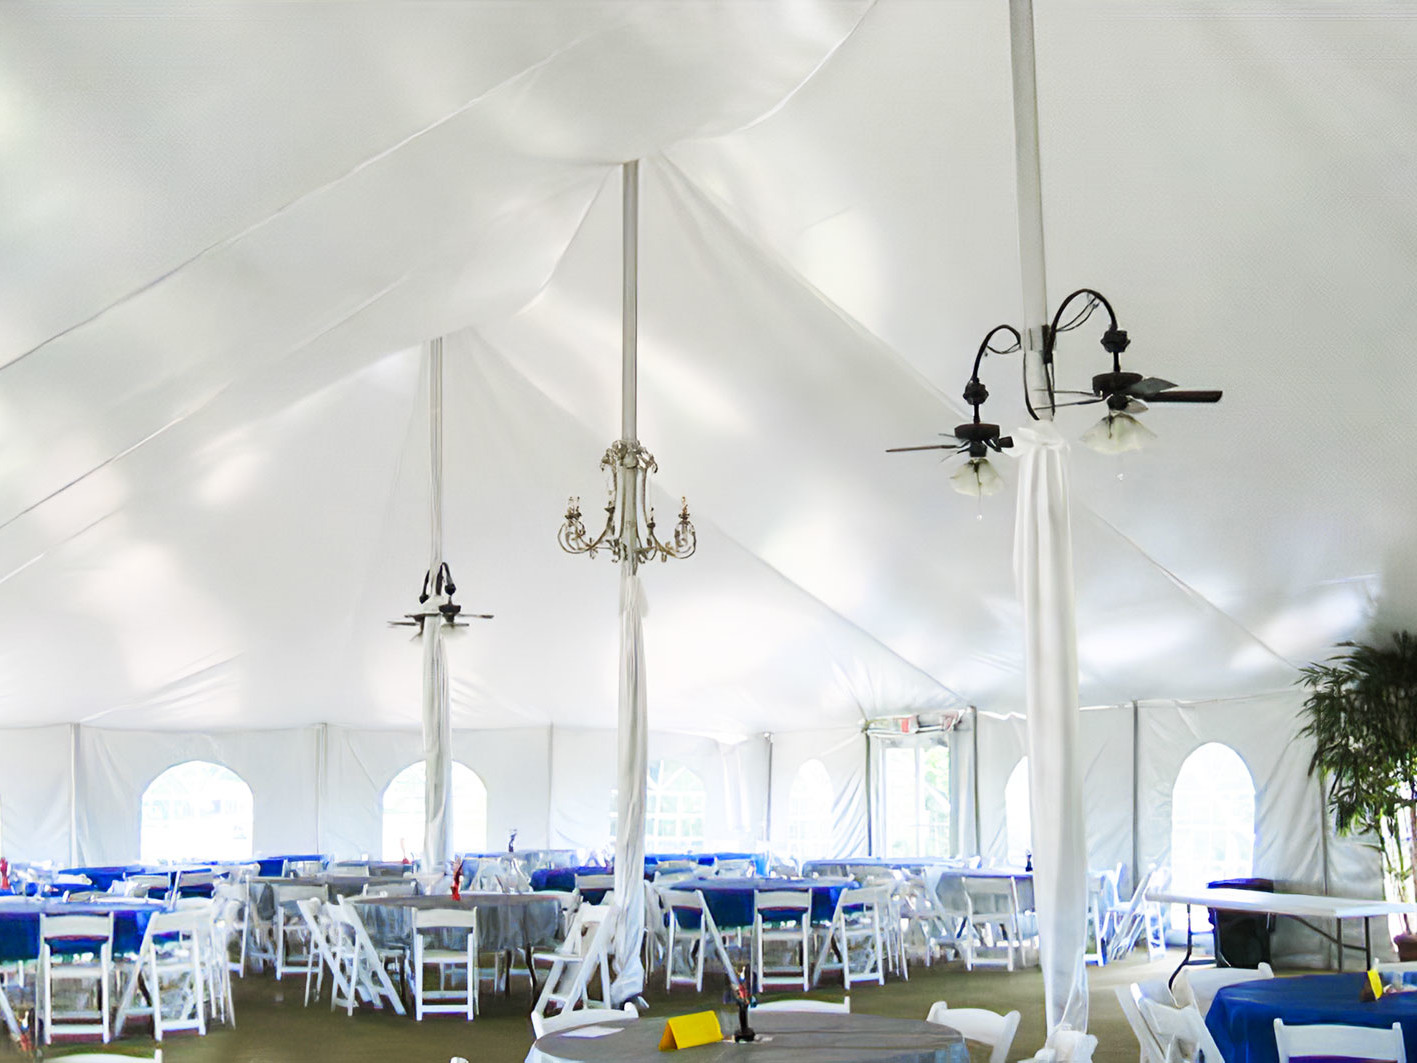 small outdoor wedding tents